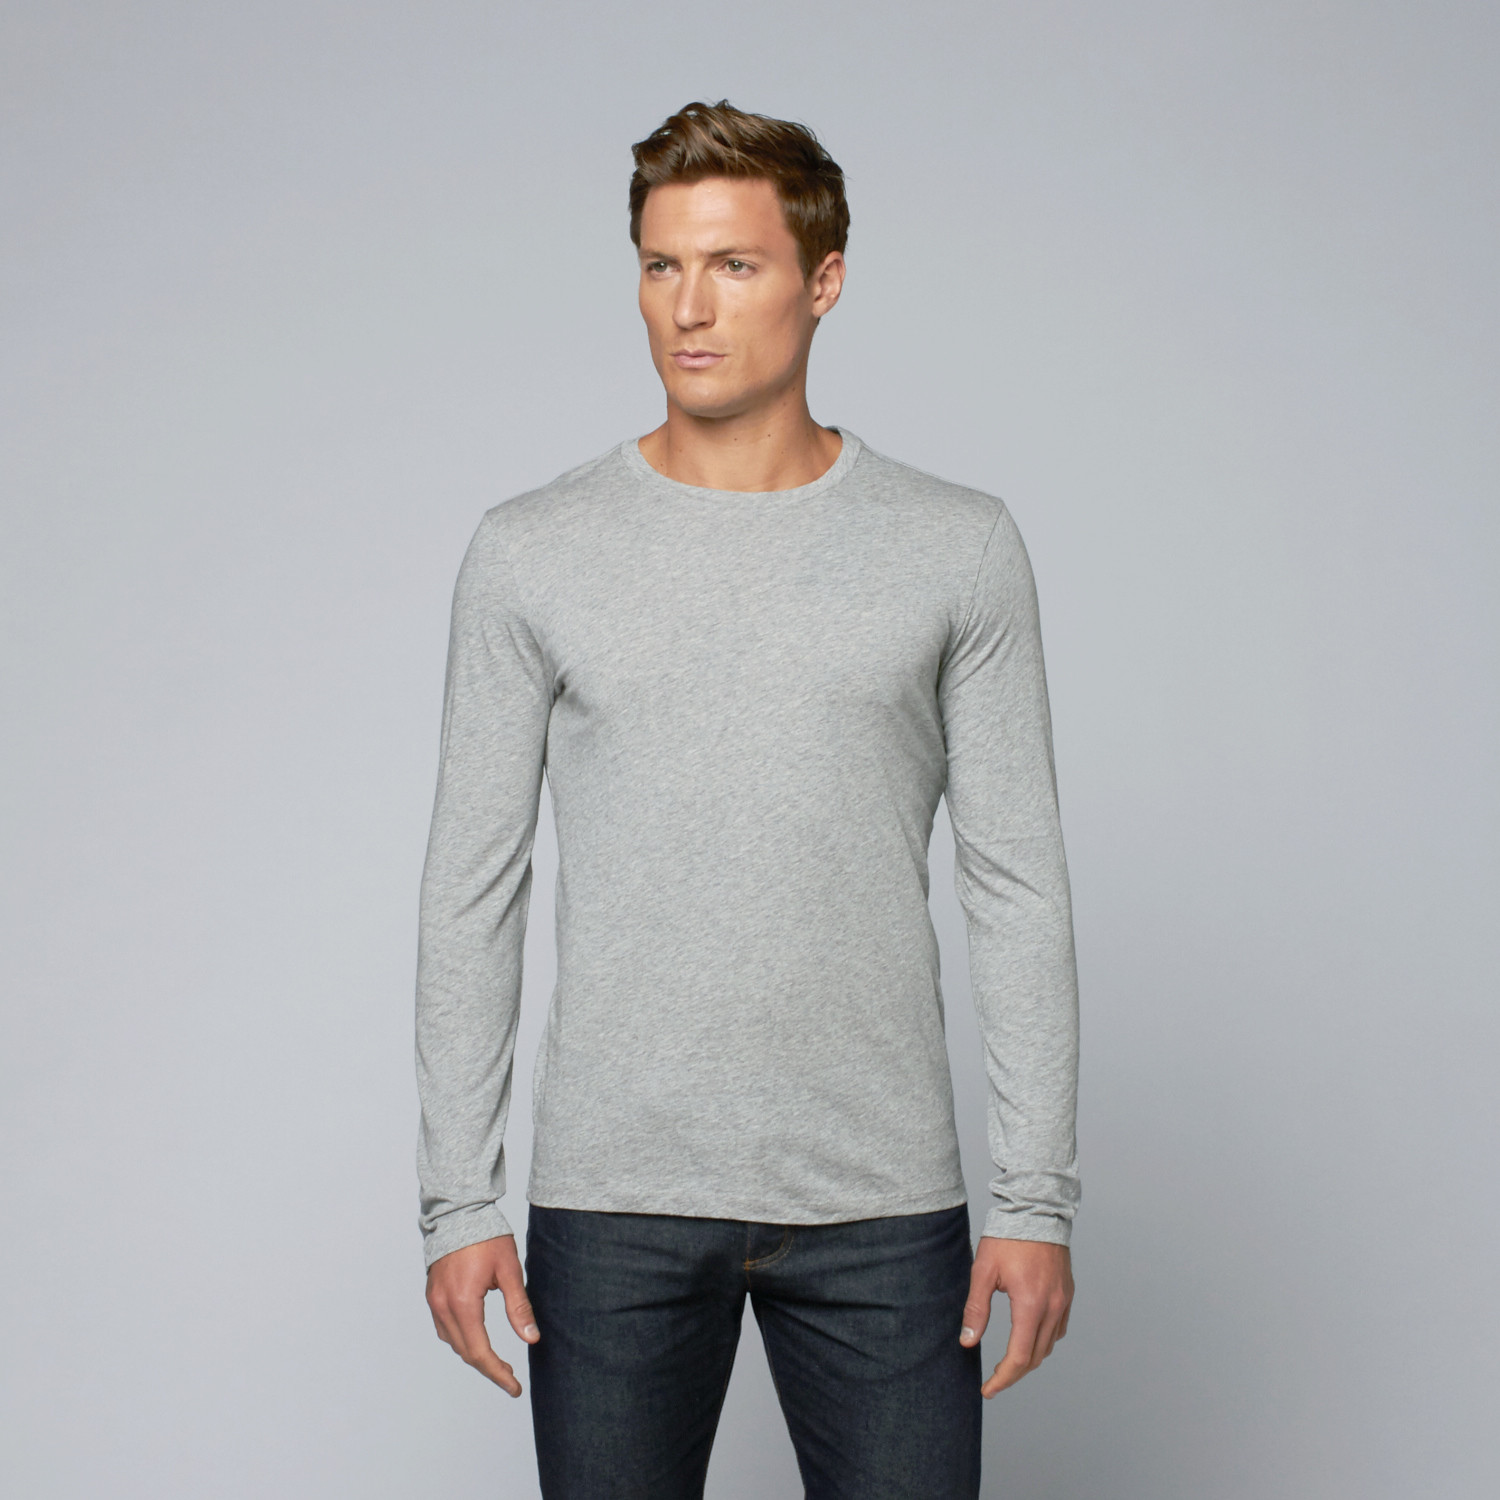 Pima Cotton Long Sleeve Tee // Grey (M) - OPNK - Touch of Modern